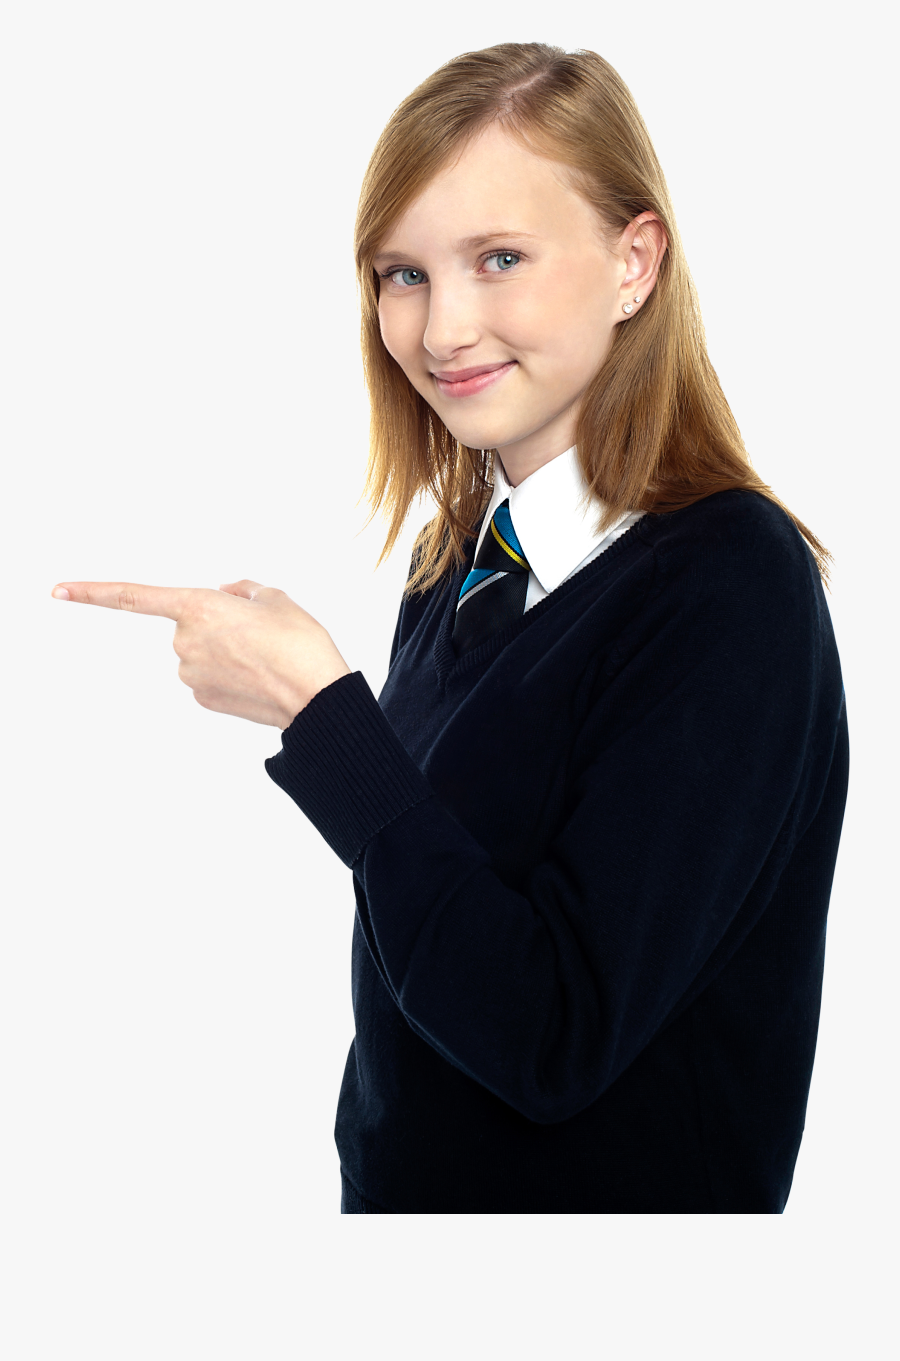 Women Pointing Left Png Image, Transparent Clipart